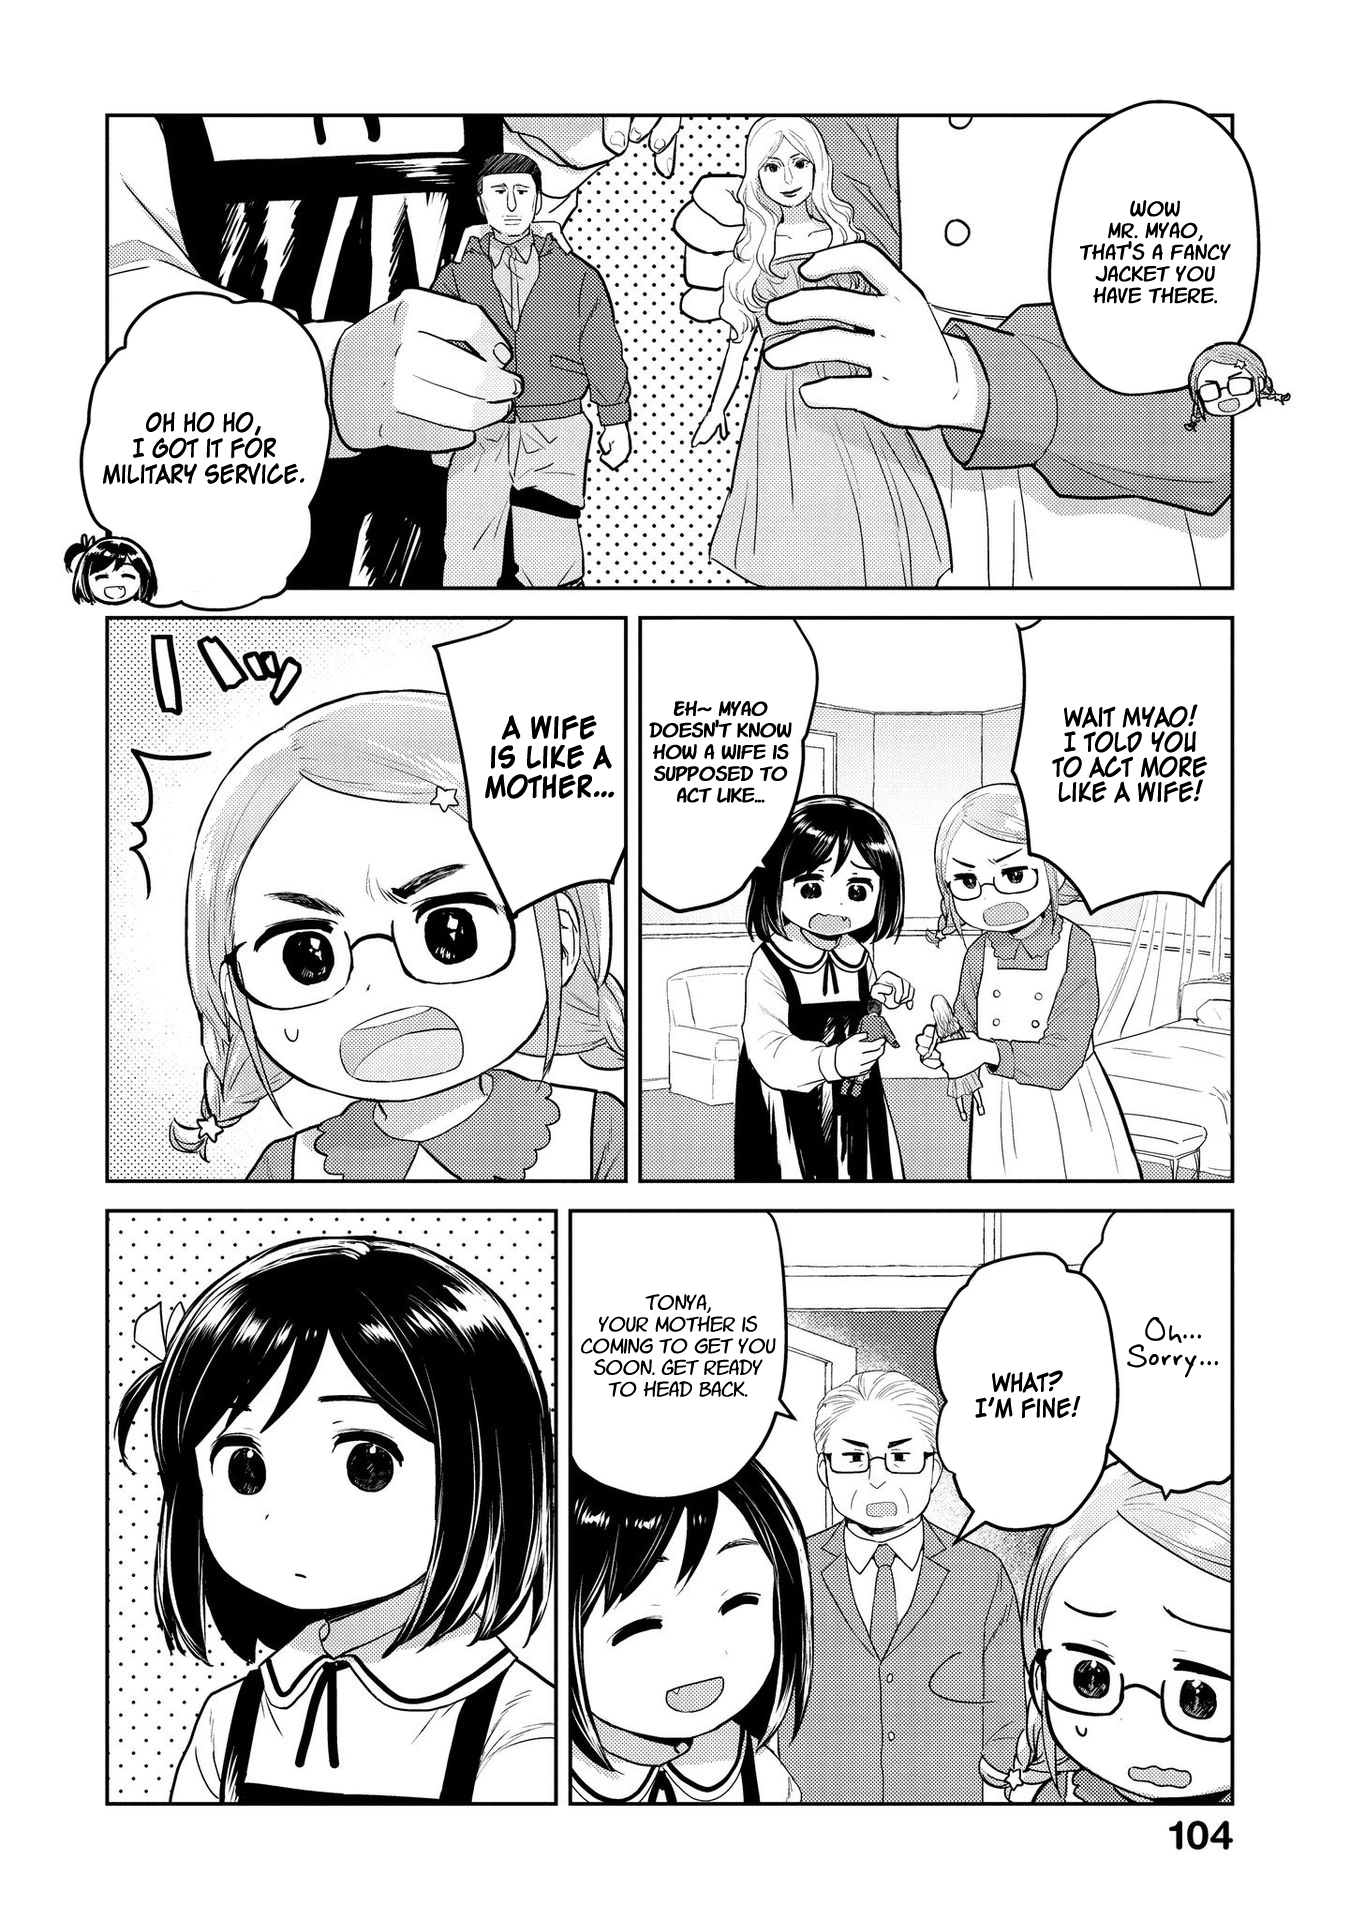 Oh, Our General Myao Vol.2 Chapter 23: In Which Myao Has A Call With Her Mother (Part 1) - Picture 2